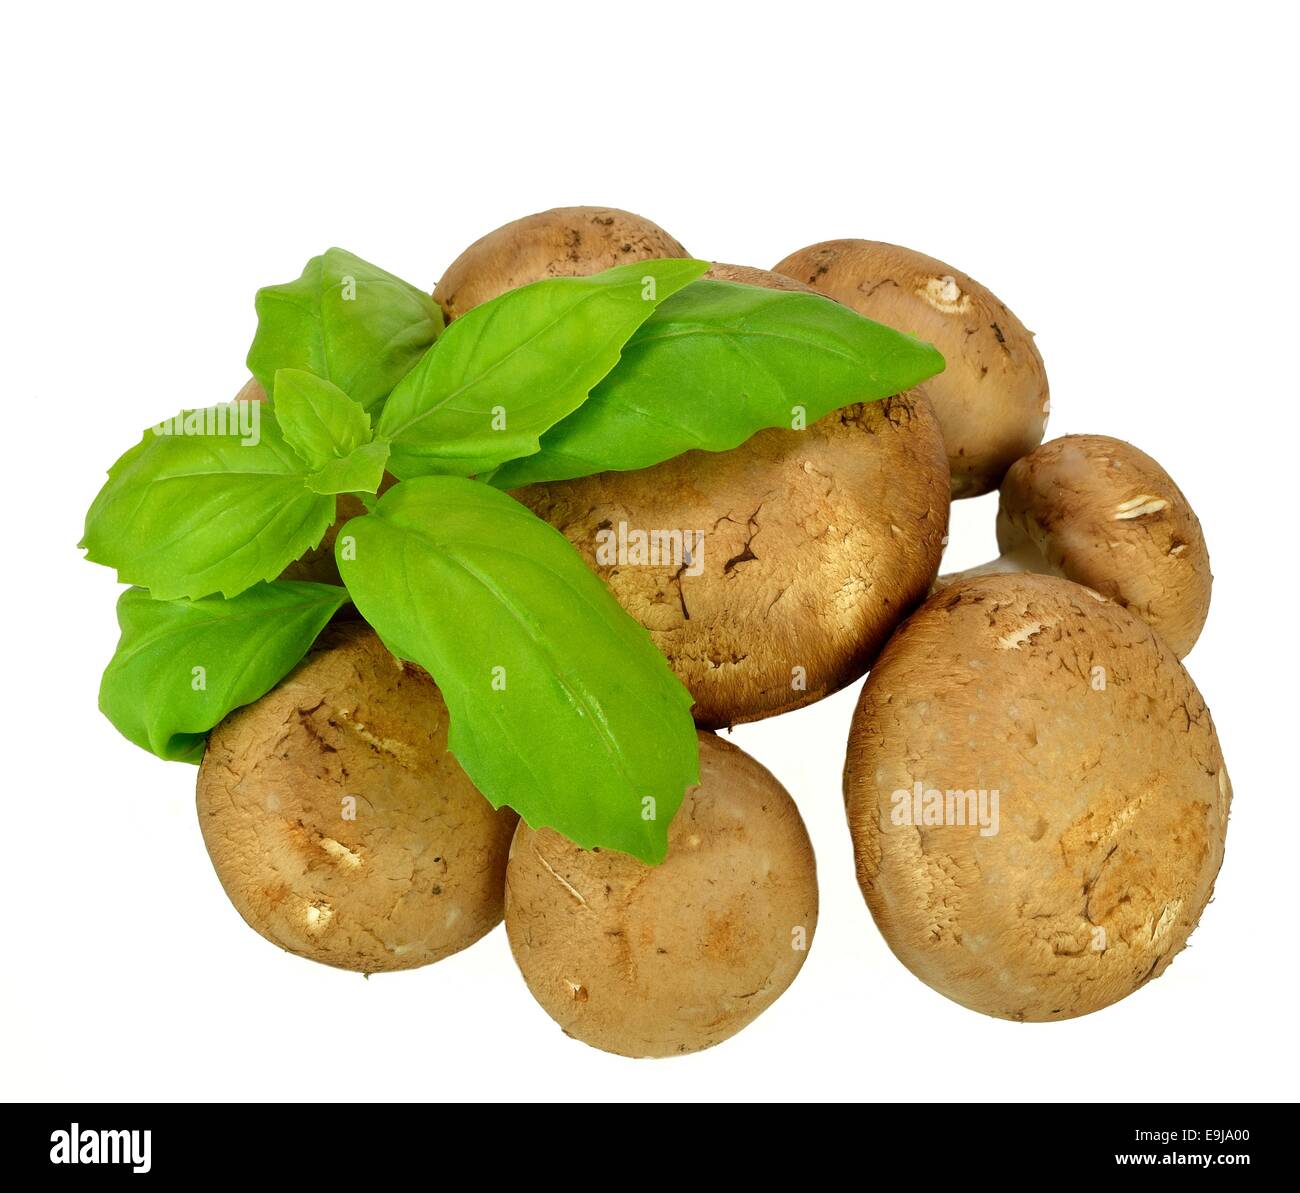 Baby Bella mushrooms and basil on a white background. Stock Photo